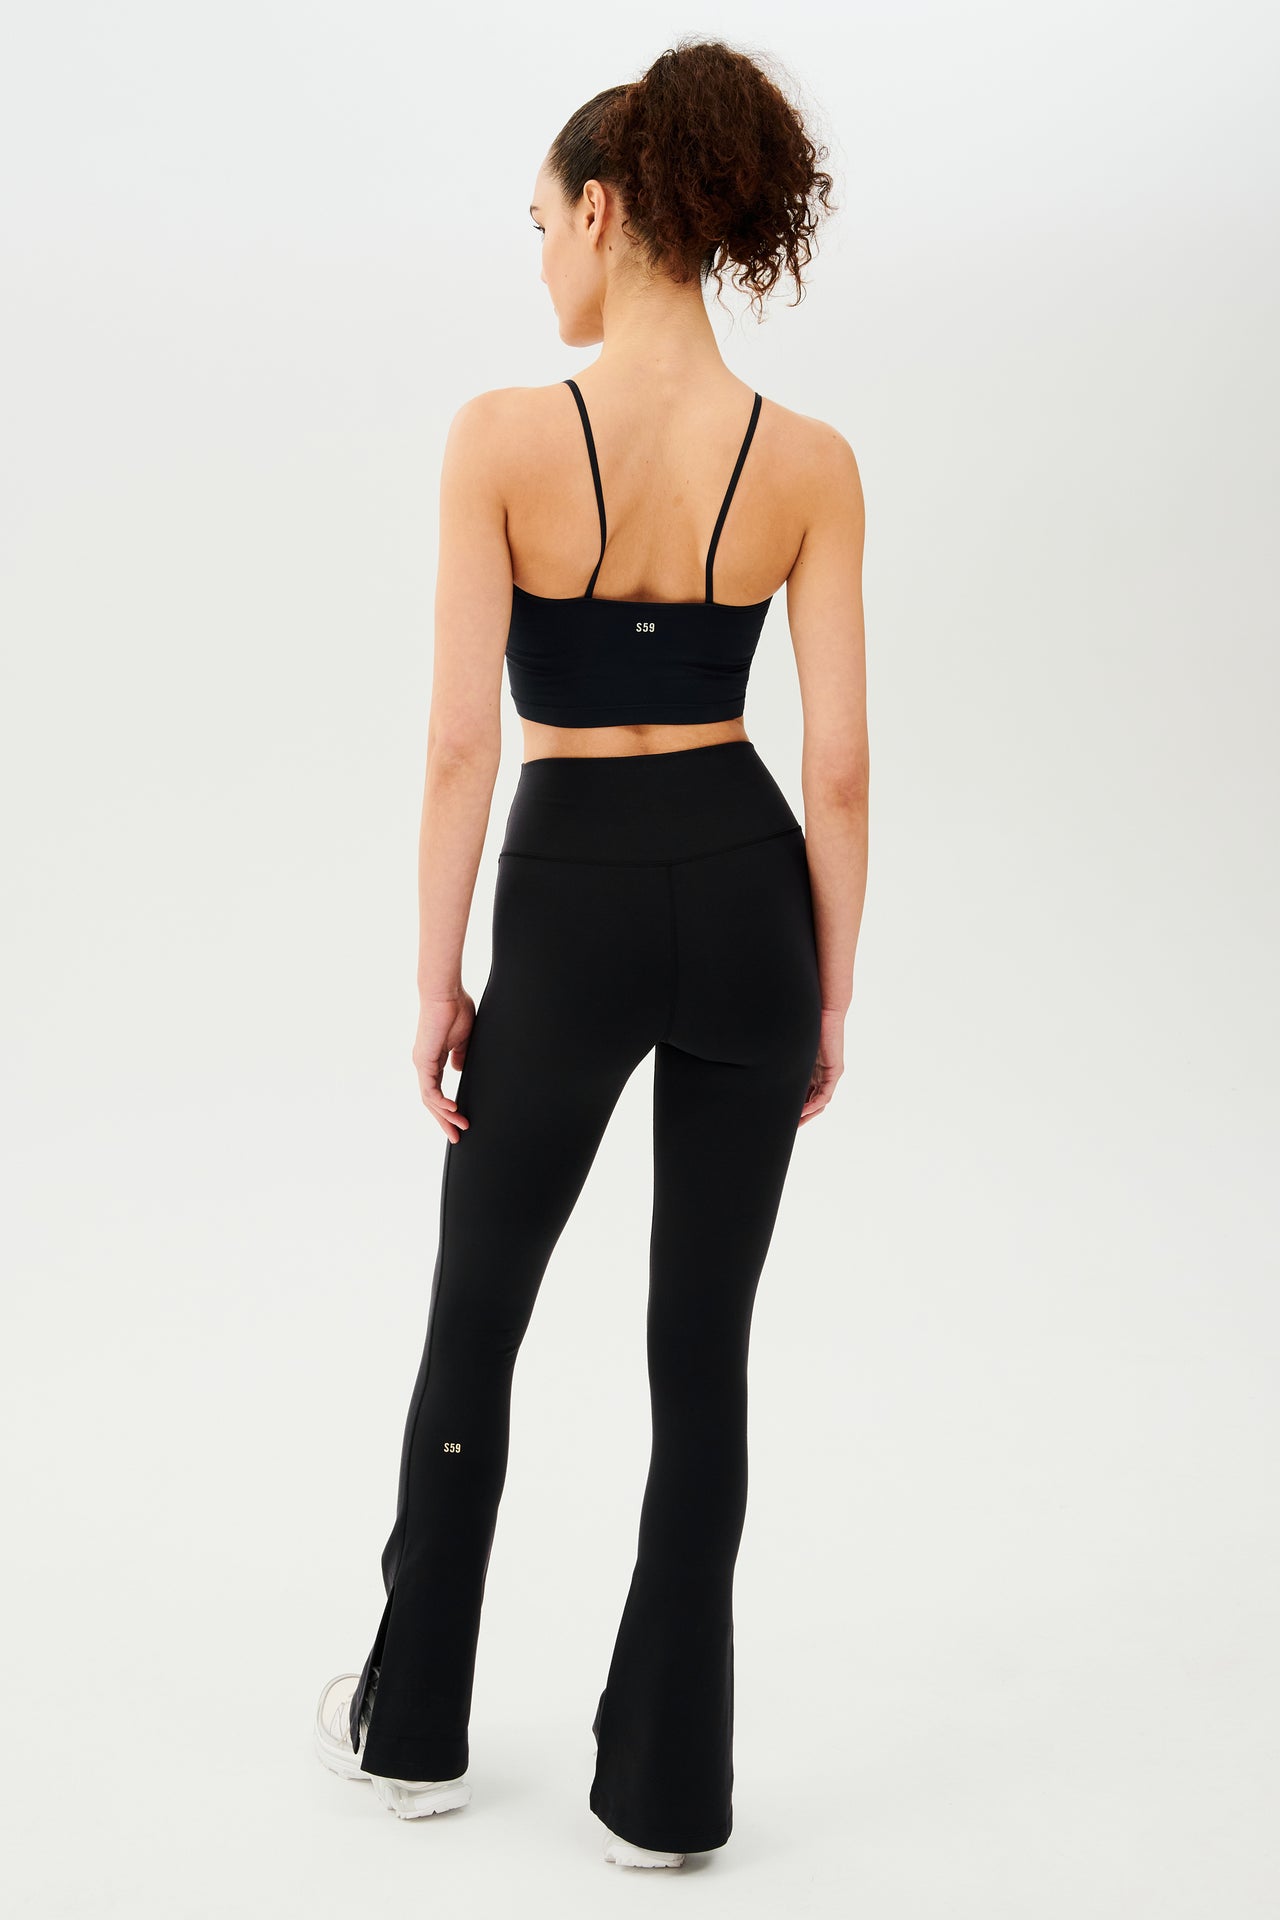 The back view of a woman in SPLITS59 Raquel High Waist Flare w/ Split Hem - Black leggings, perfect for gym workouts.